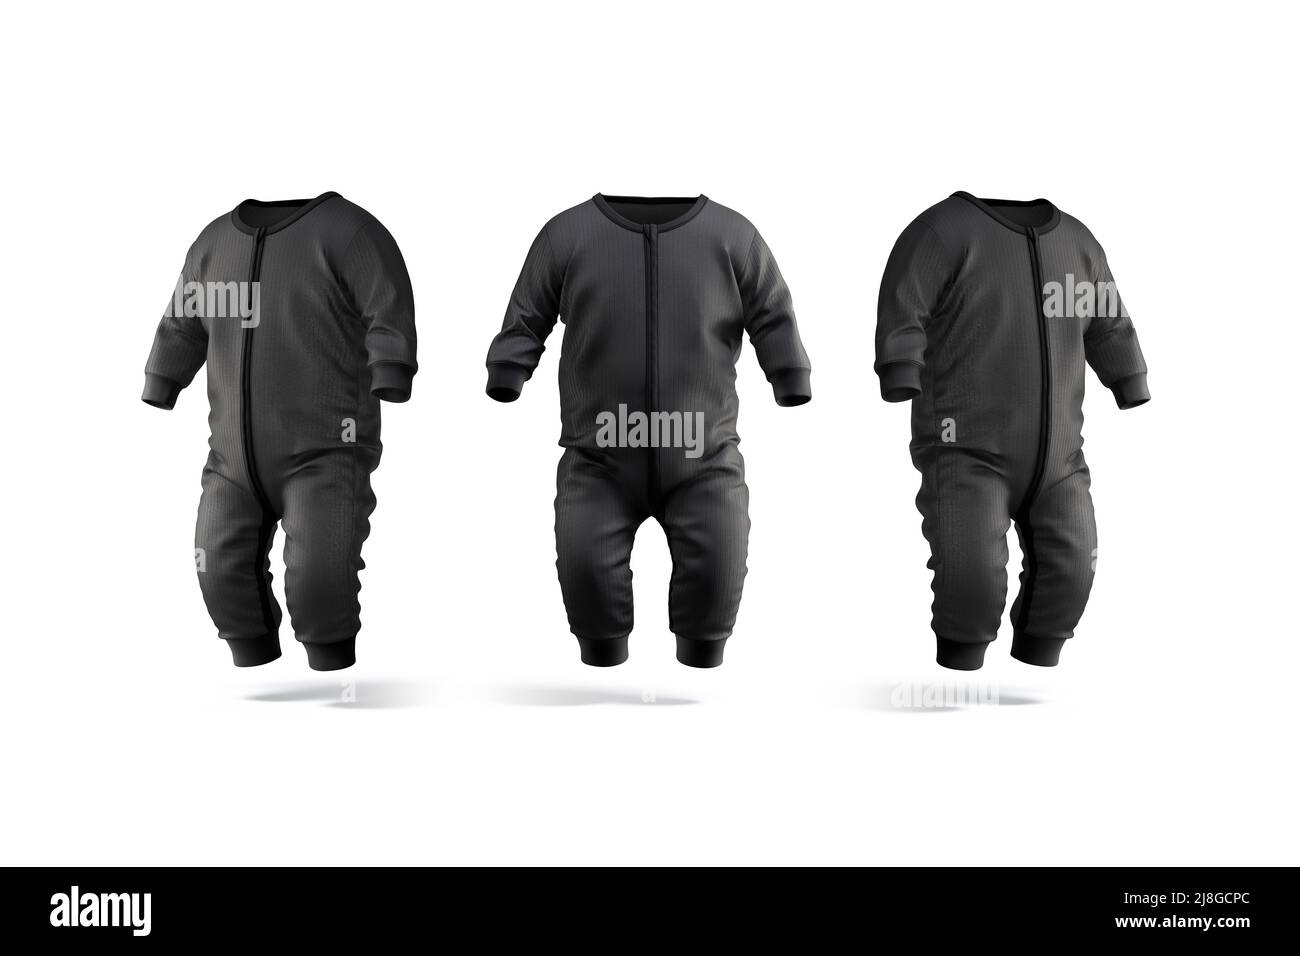 Blank black baby zip-up sleepsuit mockup, front and side view Stock Photo